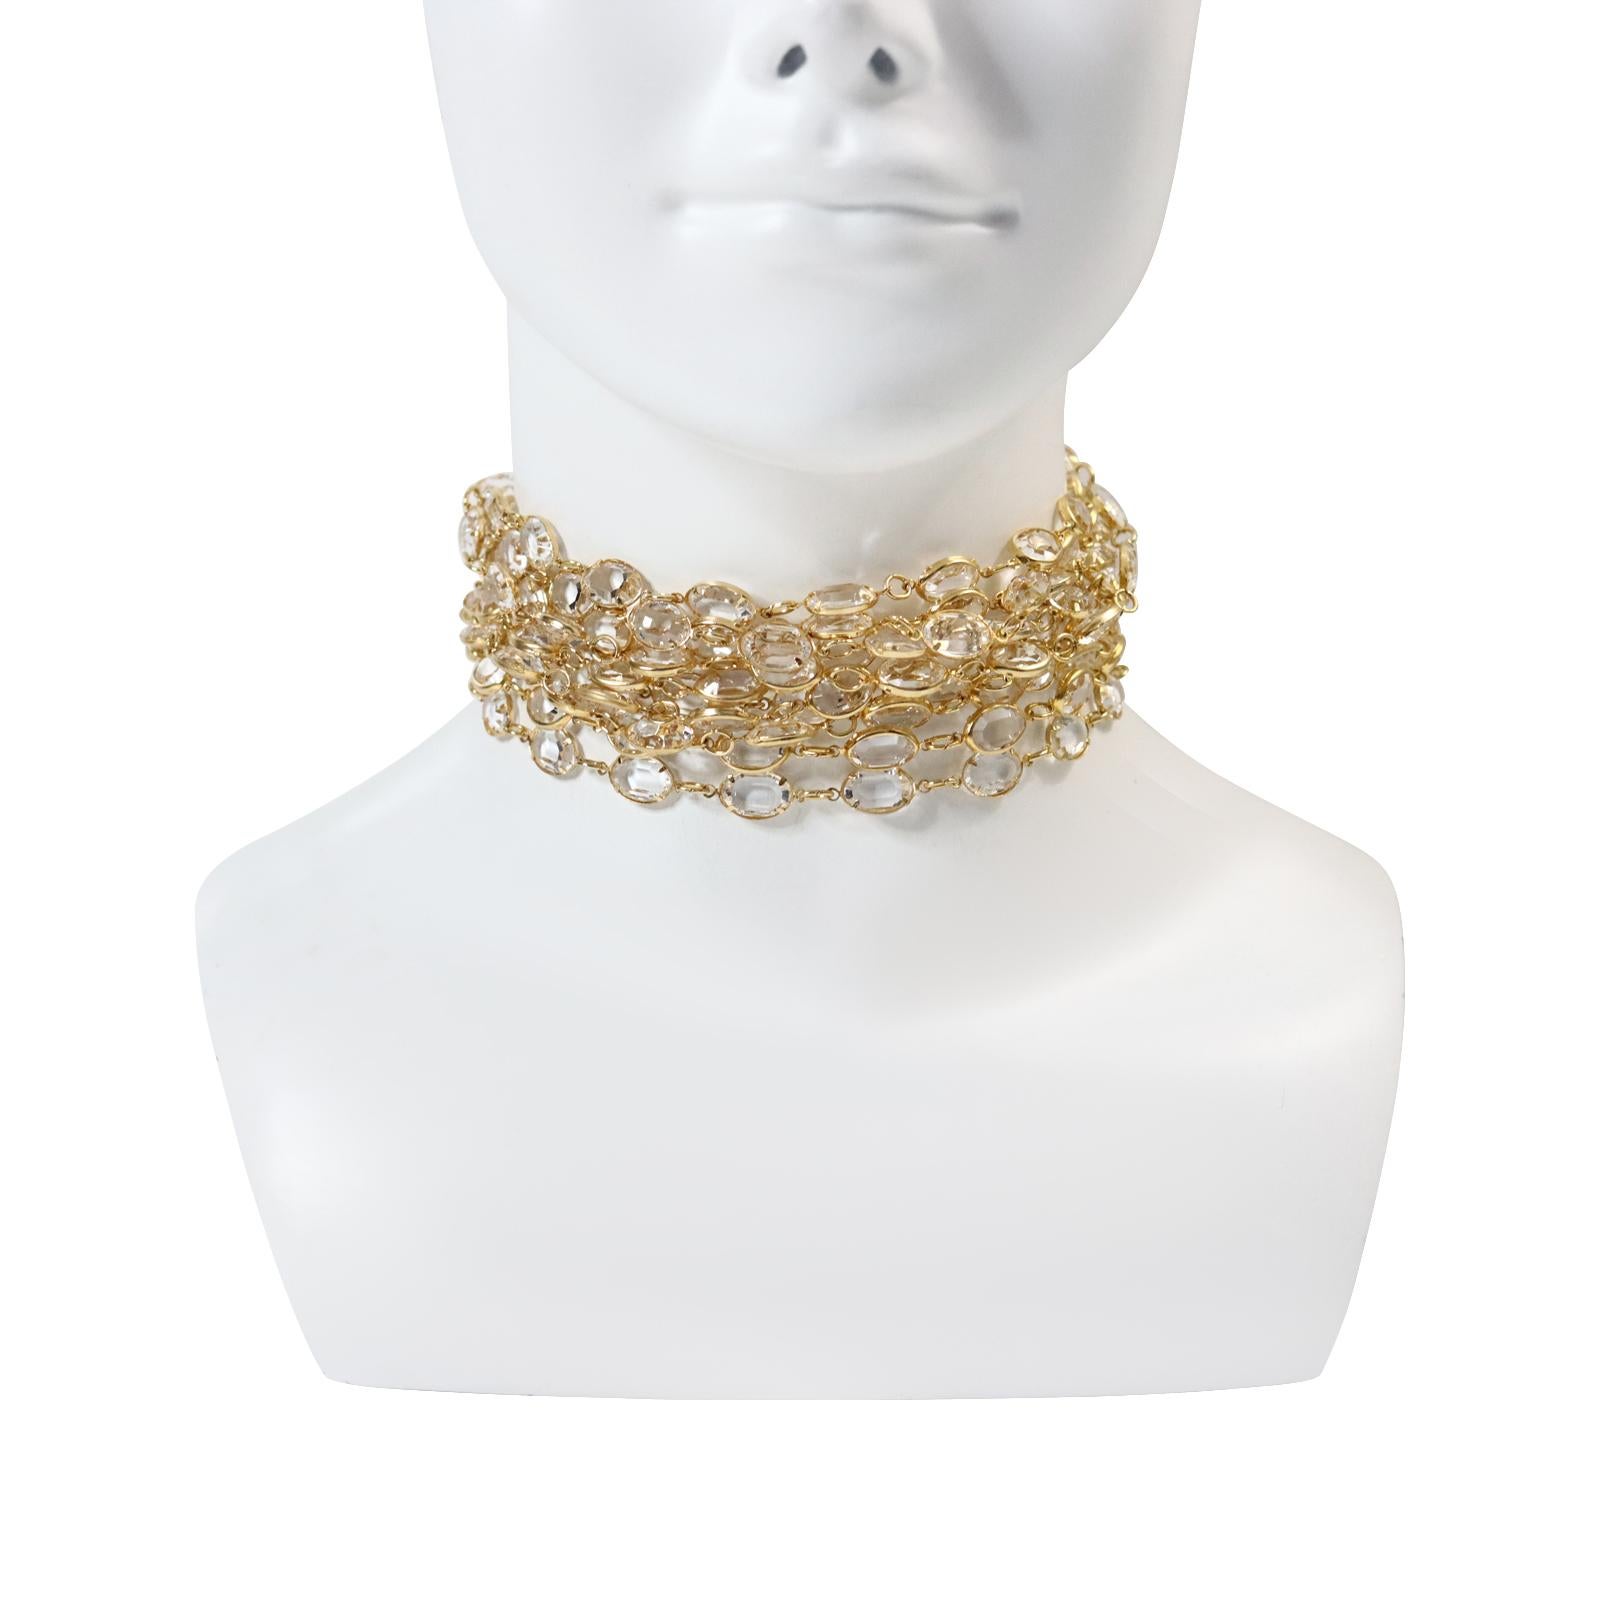 Vintage Crystal Diamante Wide Choker Circa 1980s. This is one of the most gorgeous chokers I have ever come across. It is so divine.  Made up of 10 rows of oval cut open back crystal set in gold tone. The end closures have gold pieces that have pave